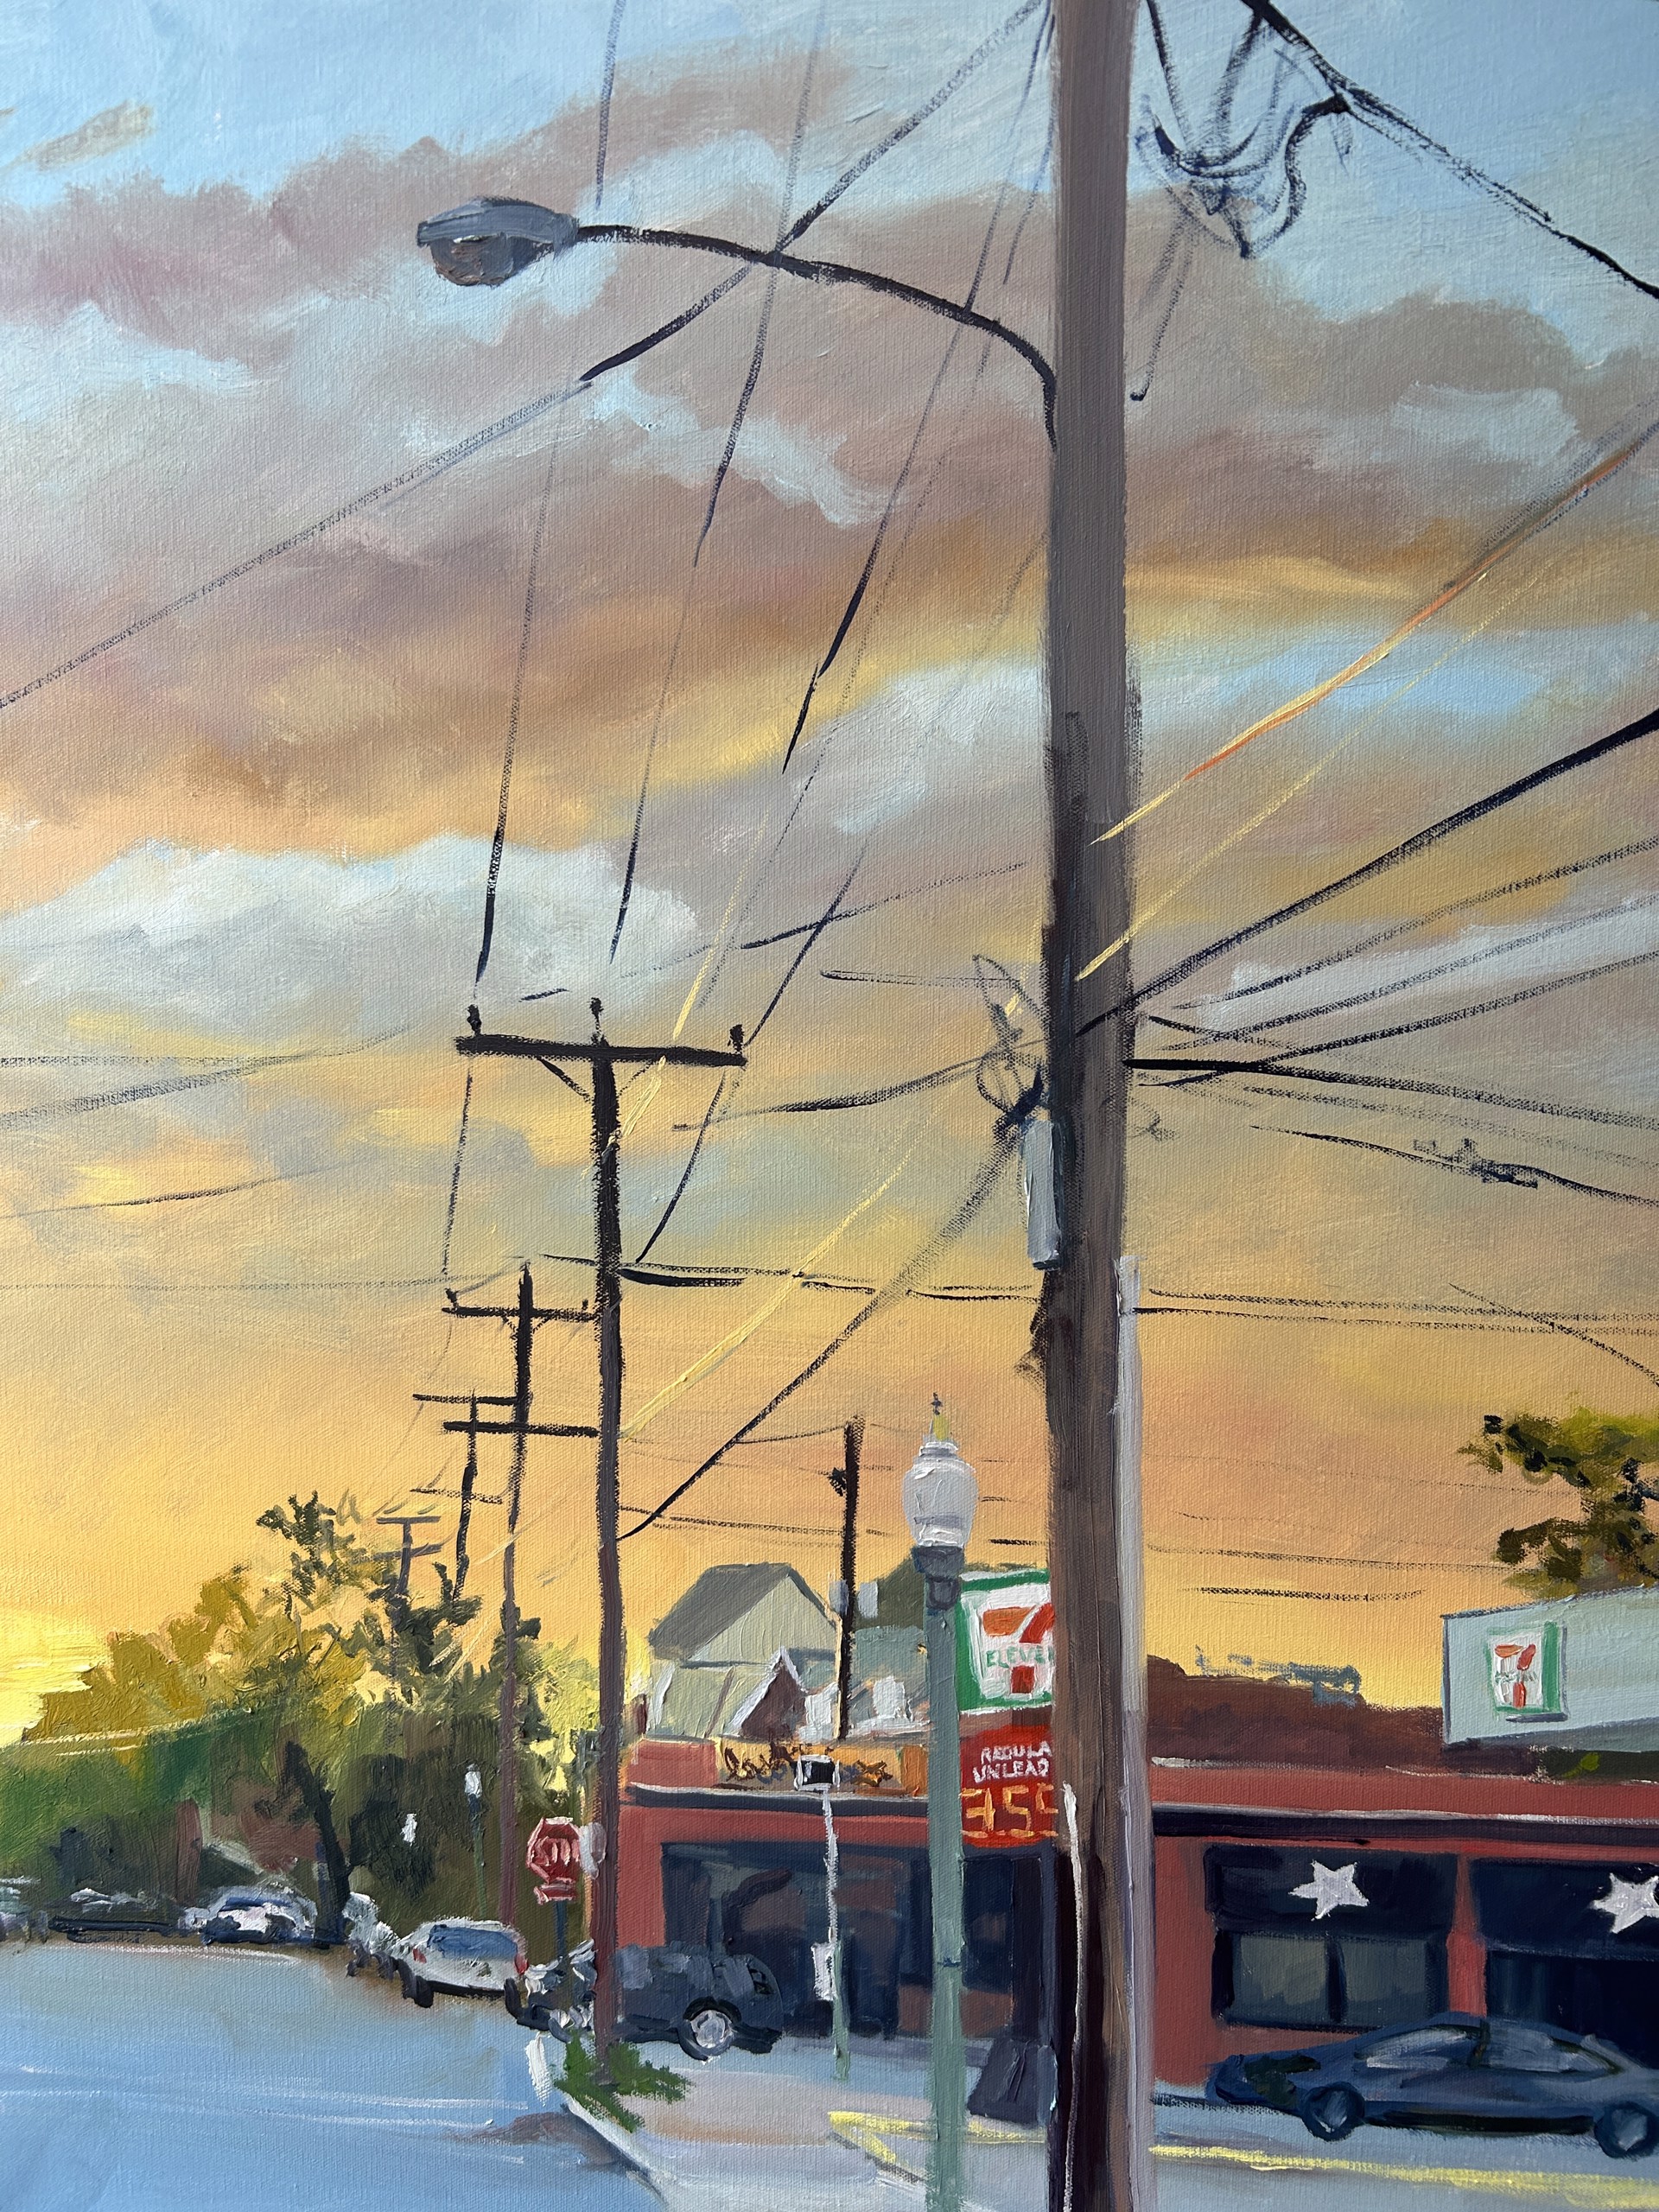 Sunset over Buddy's-Devil's Triangle by Natalie Colleen Gates